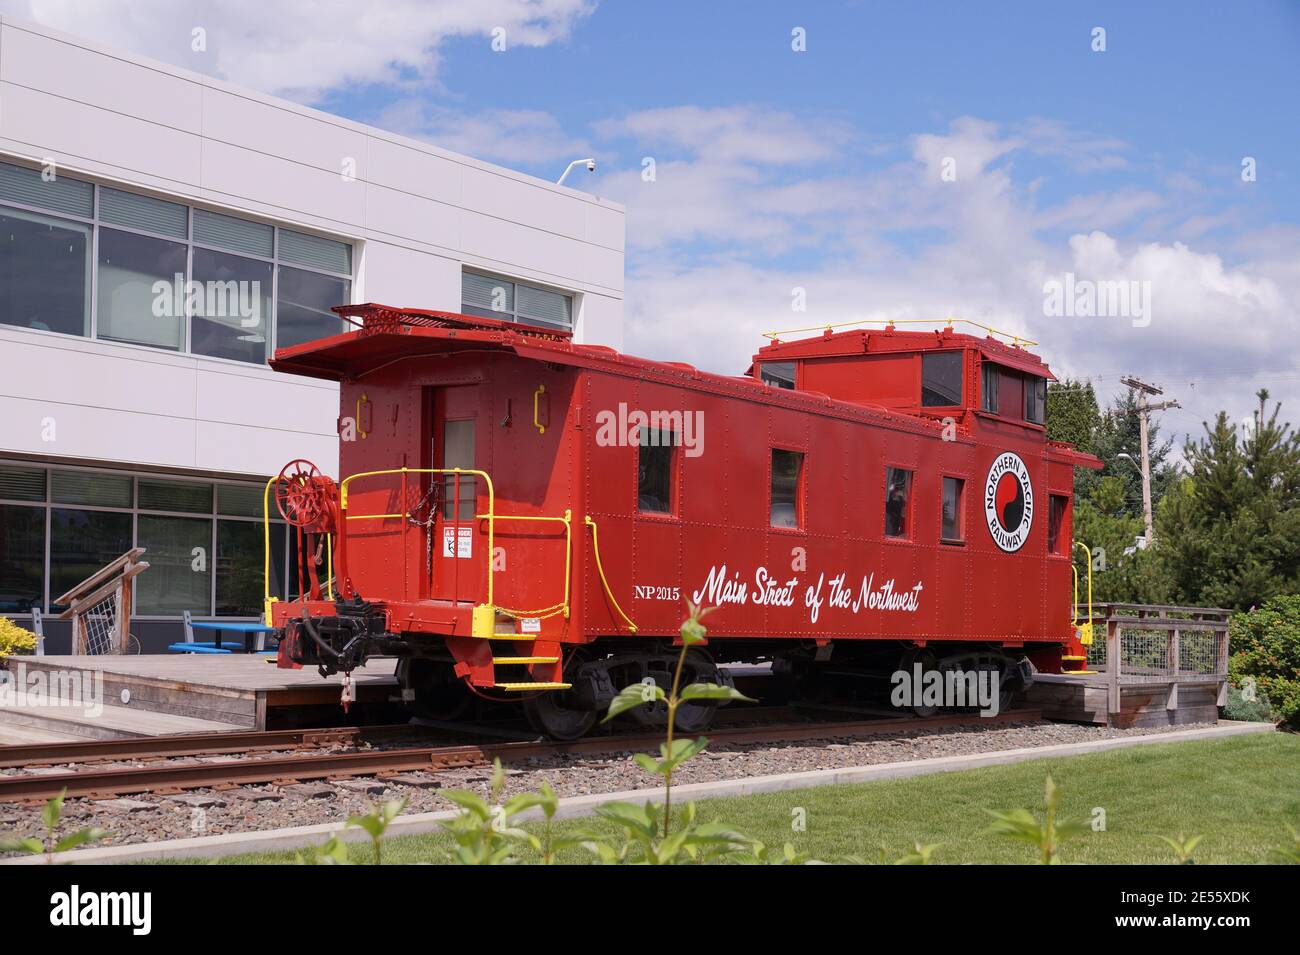 Antique caboose is a reminder of the past Northern Pacific Railroad. Cross Kirkland Corridor. August 29, 2019. Stock Photo